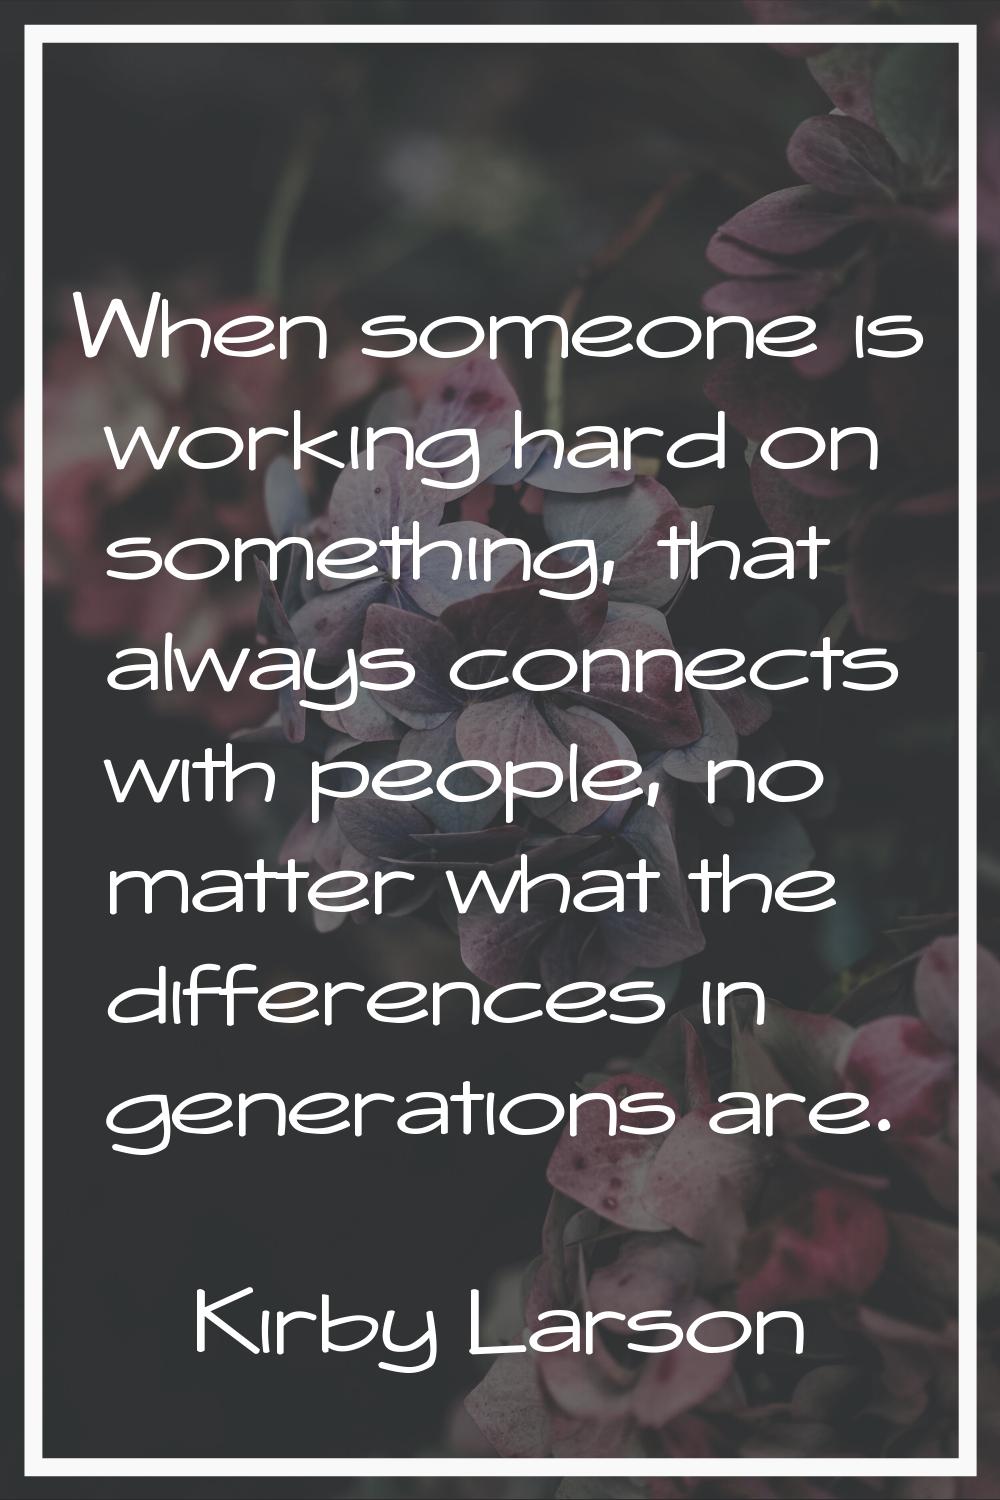 When someone is working hard on something, that always connects with people, no matter what the dif